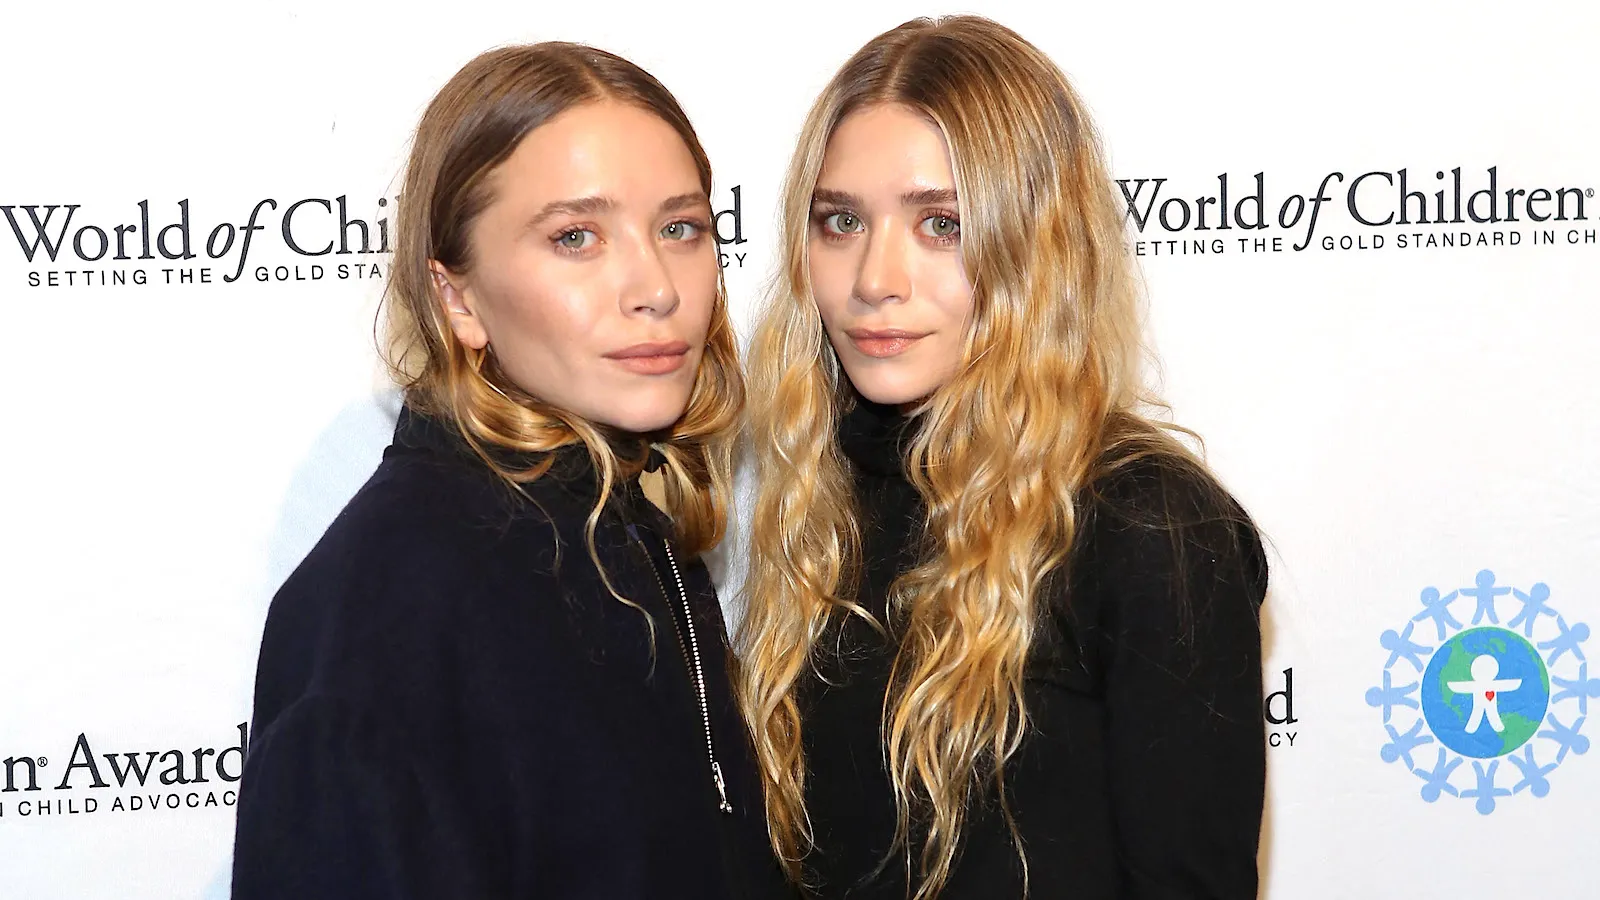 Where Are the Olsen Twins Now?